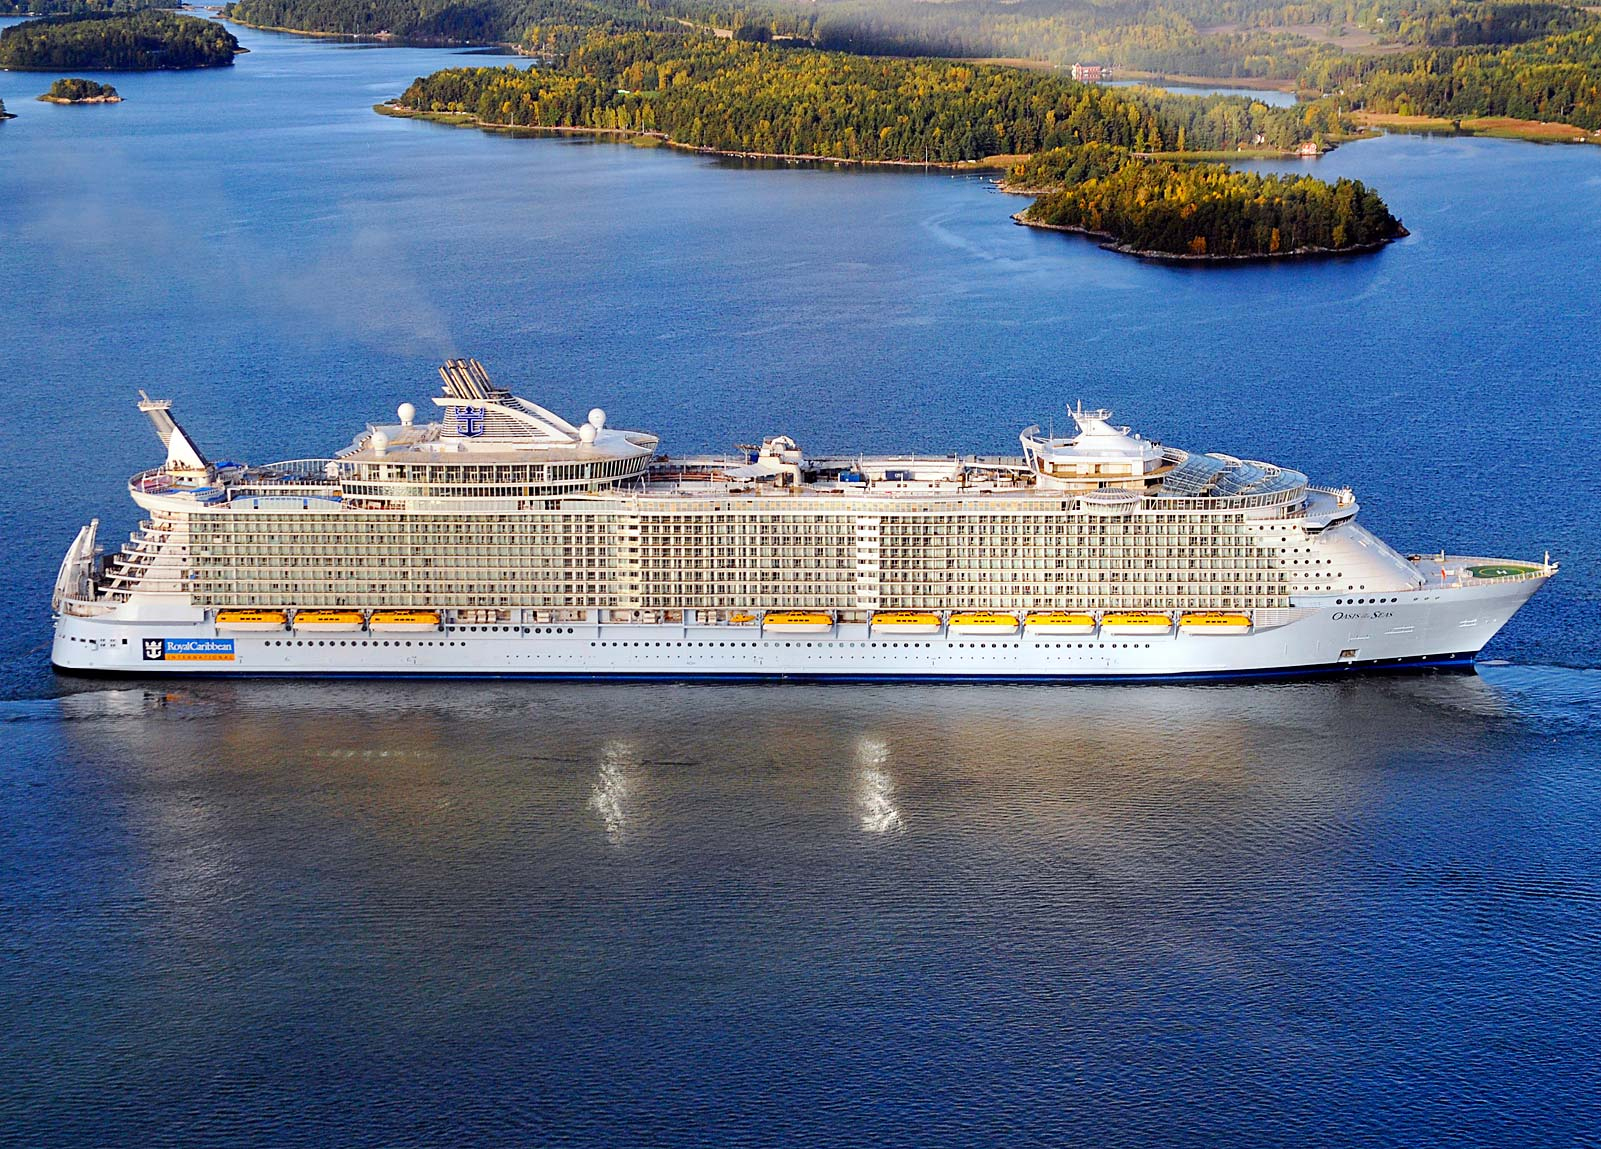 16 Largest Cruise Ships in the World of 2022